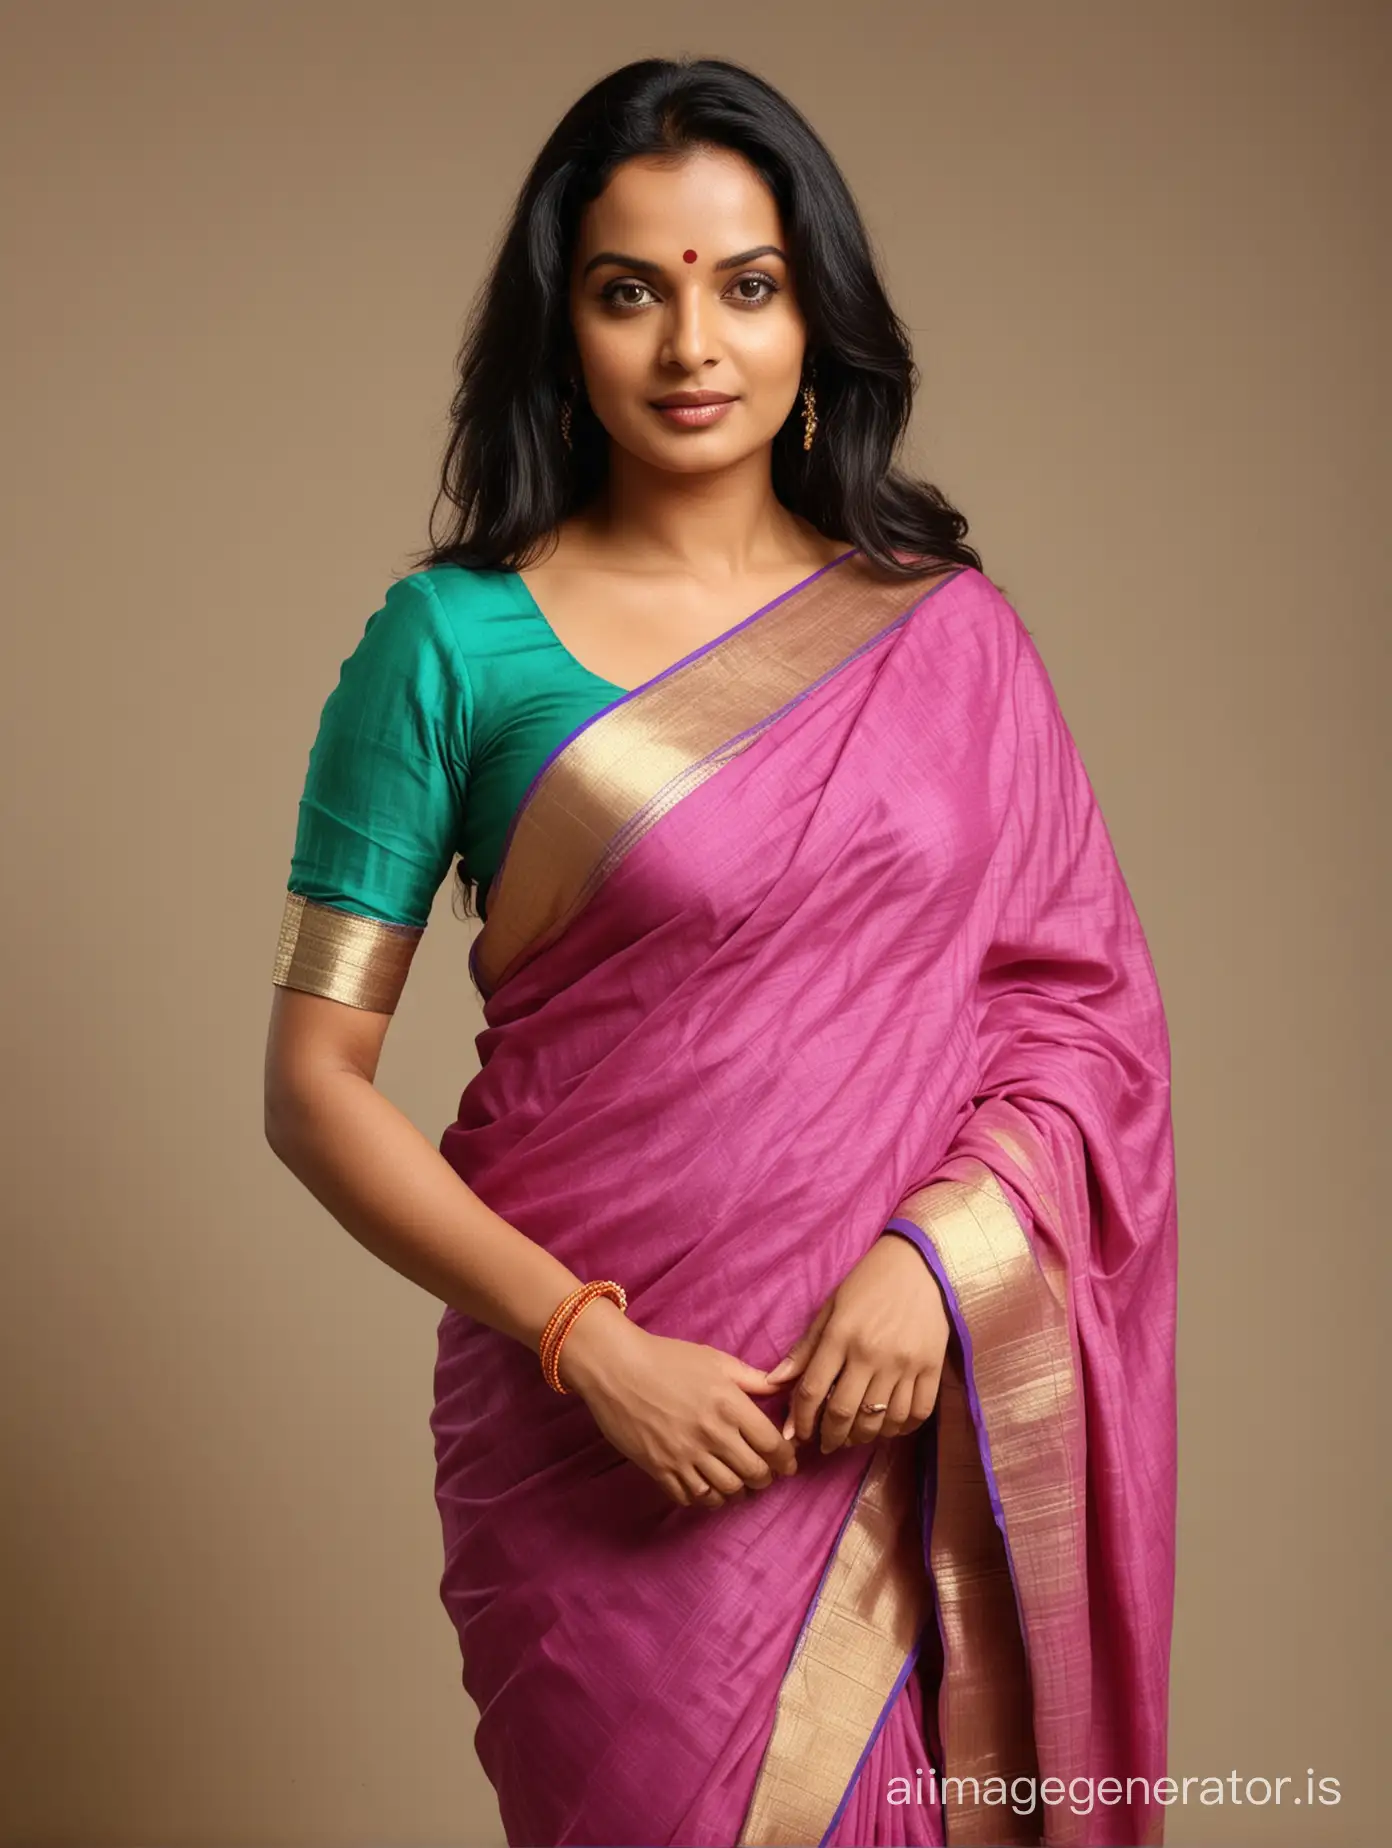 3 DSLR Full body images of 45 year old kerala woman who looks like malayalam movie actress Swetha Menon. The woman is wearing a cheap saree like a prostitute  The woman has very long hair.